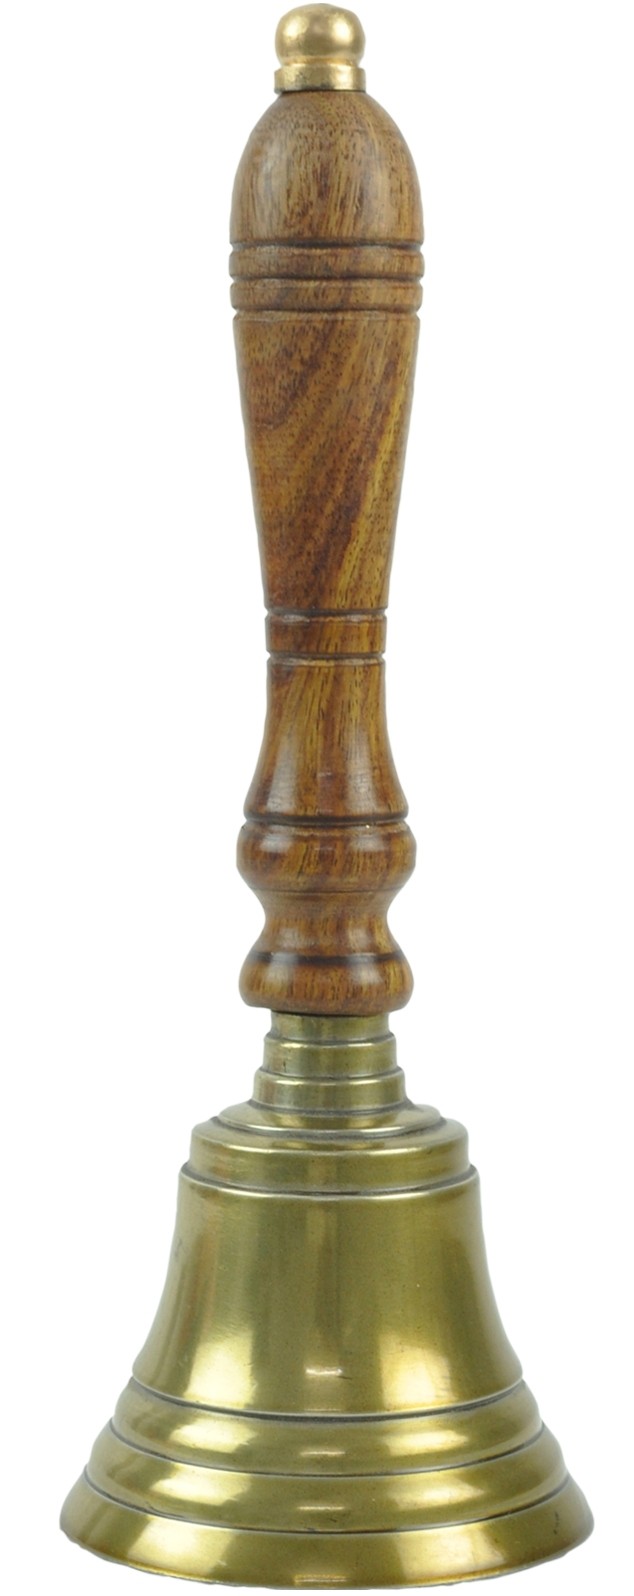 Wooden Handle Bell (Brass Antique Finish / Stress Line Finish) - 41cm